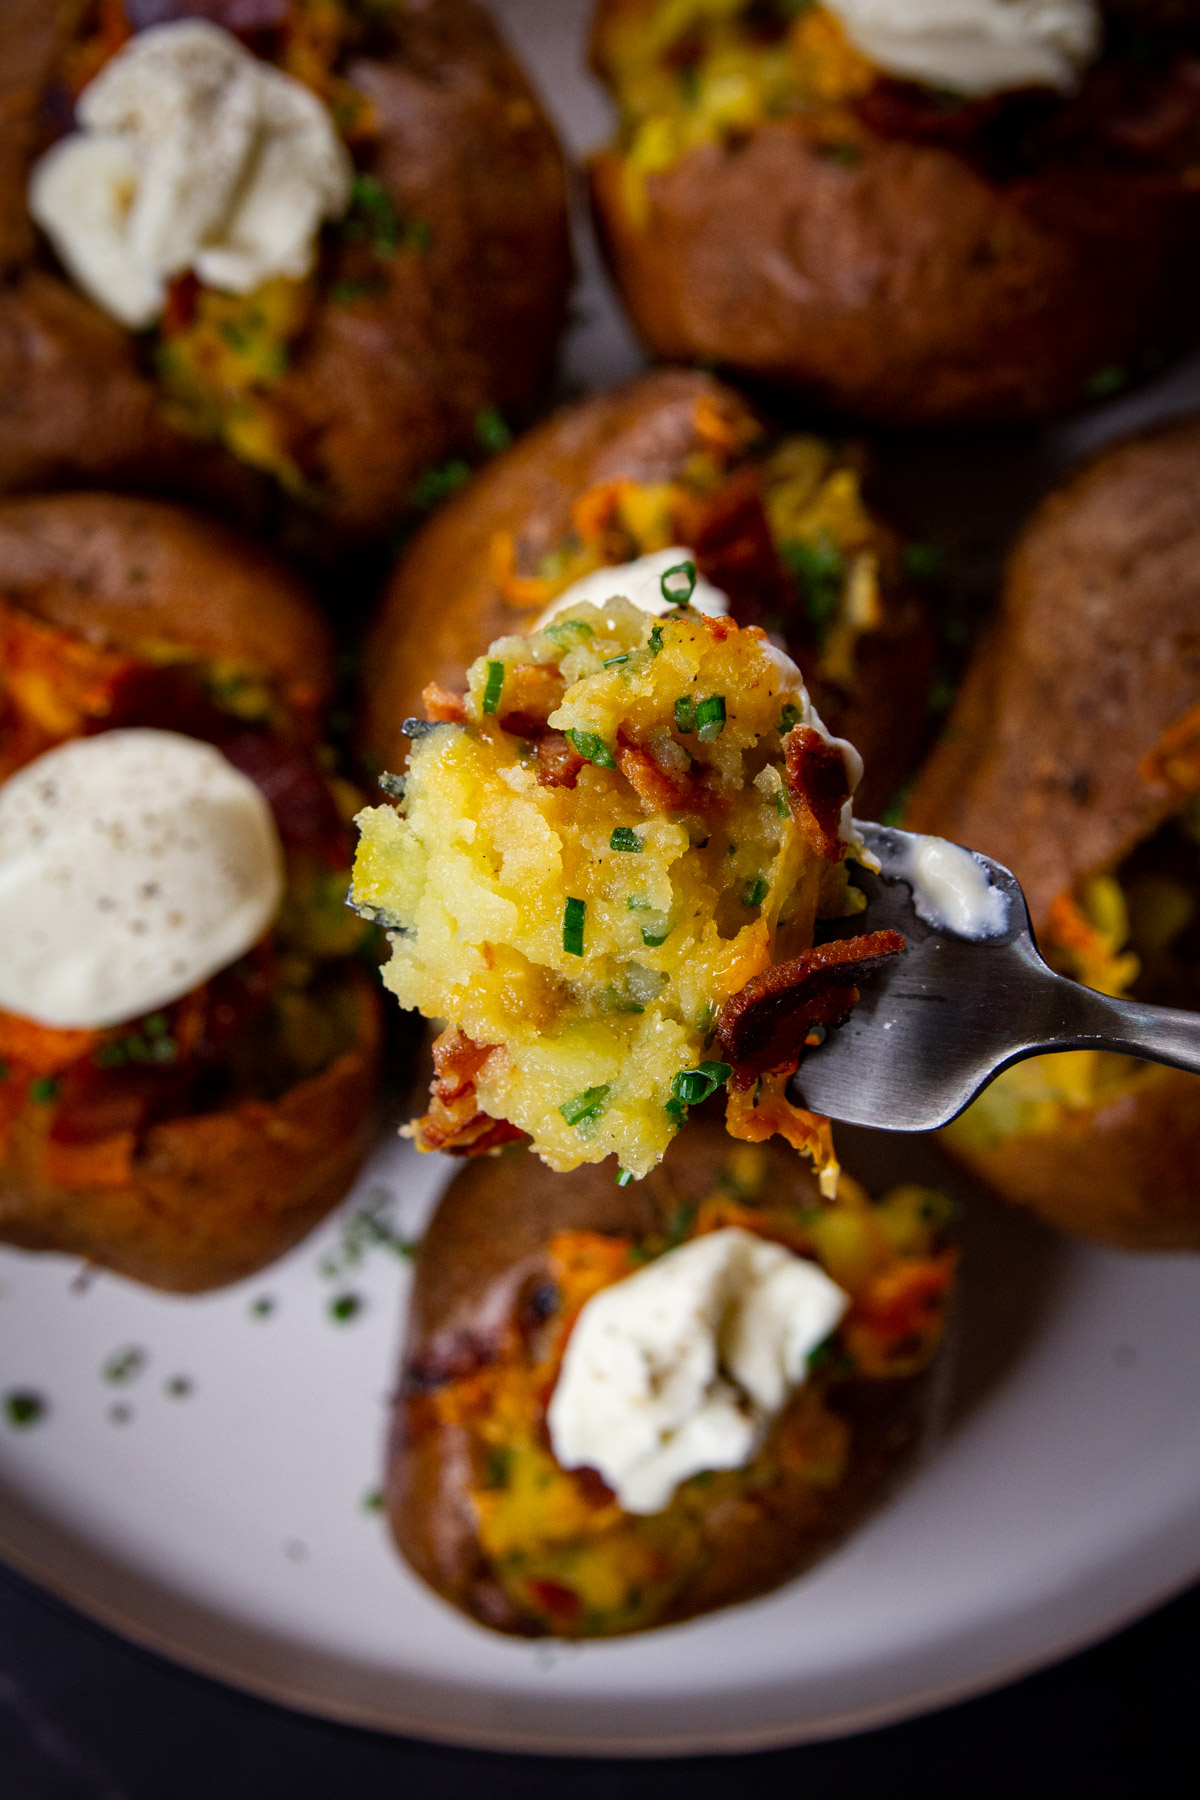 A close up of the twice baked smoked potato filling on a fork.